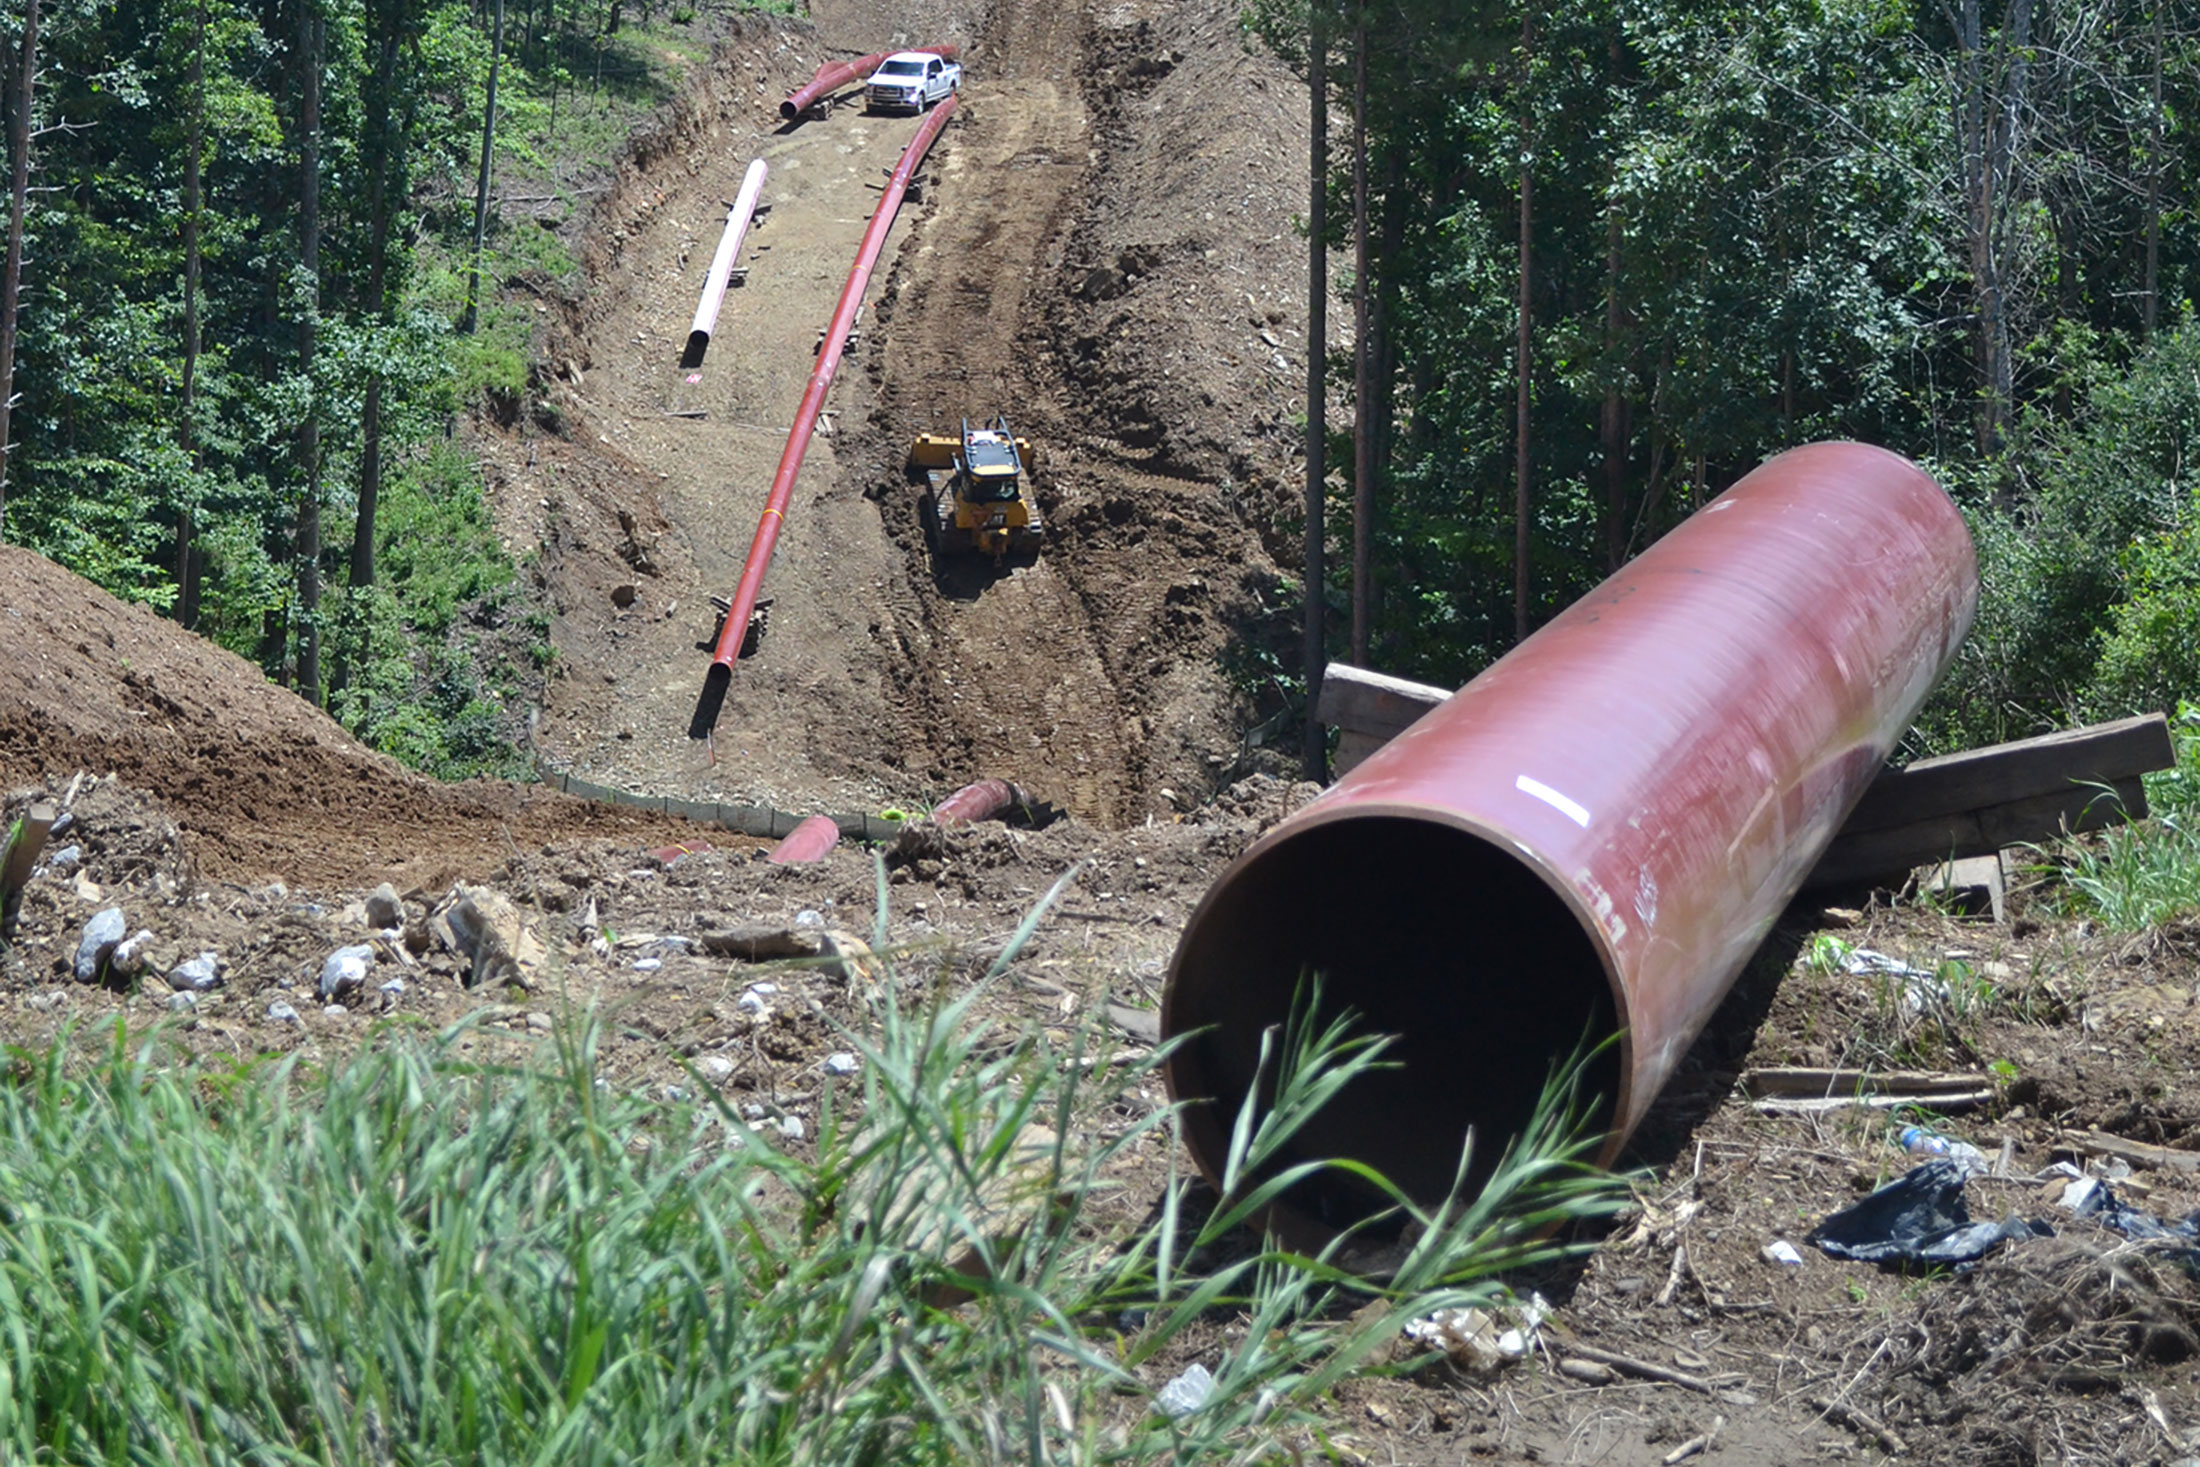 Installing a natural gas pipeline for Rover near Moundsville, W.Va.